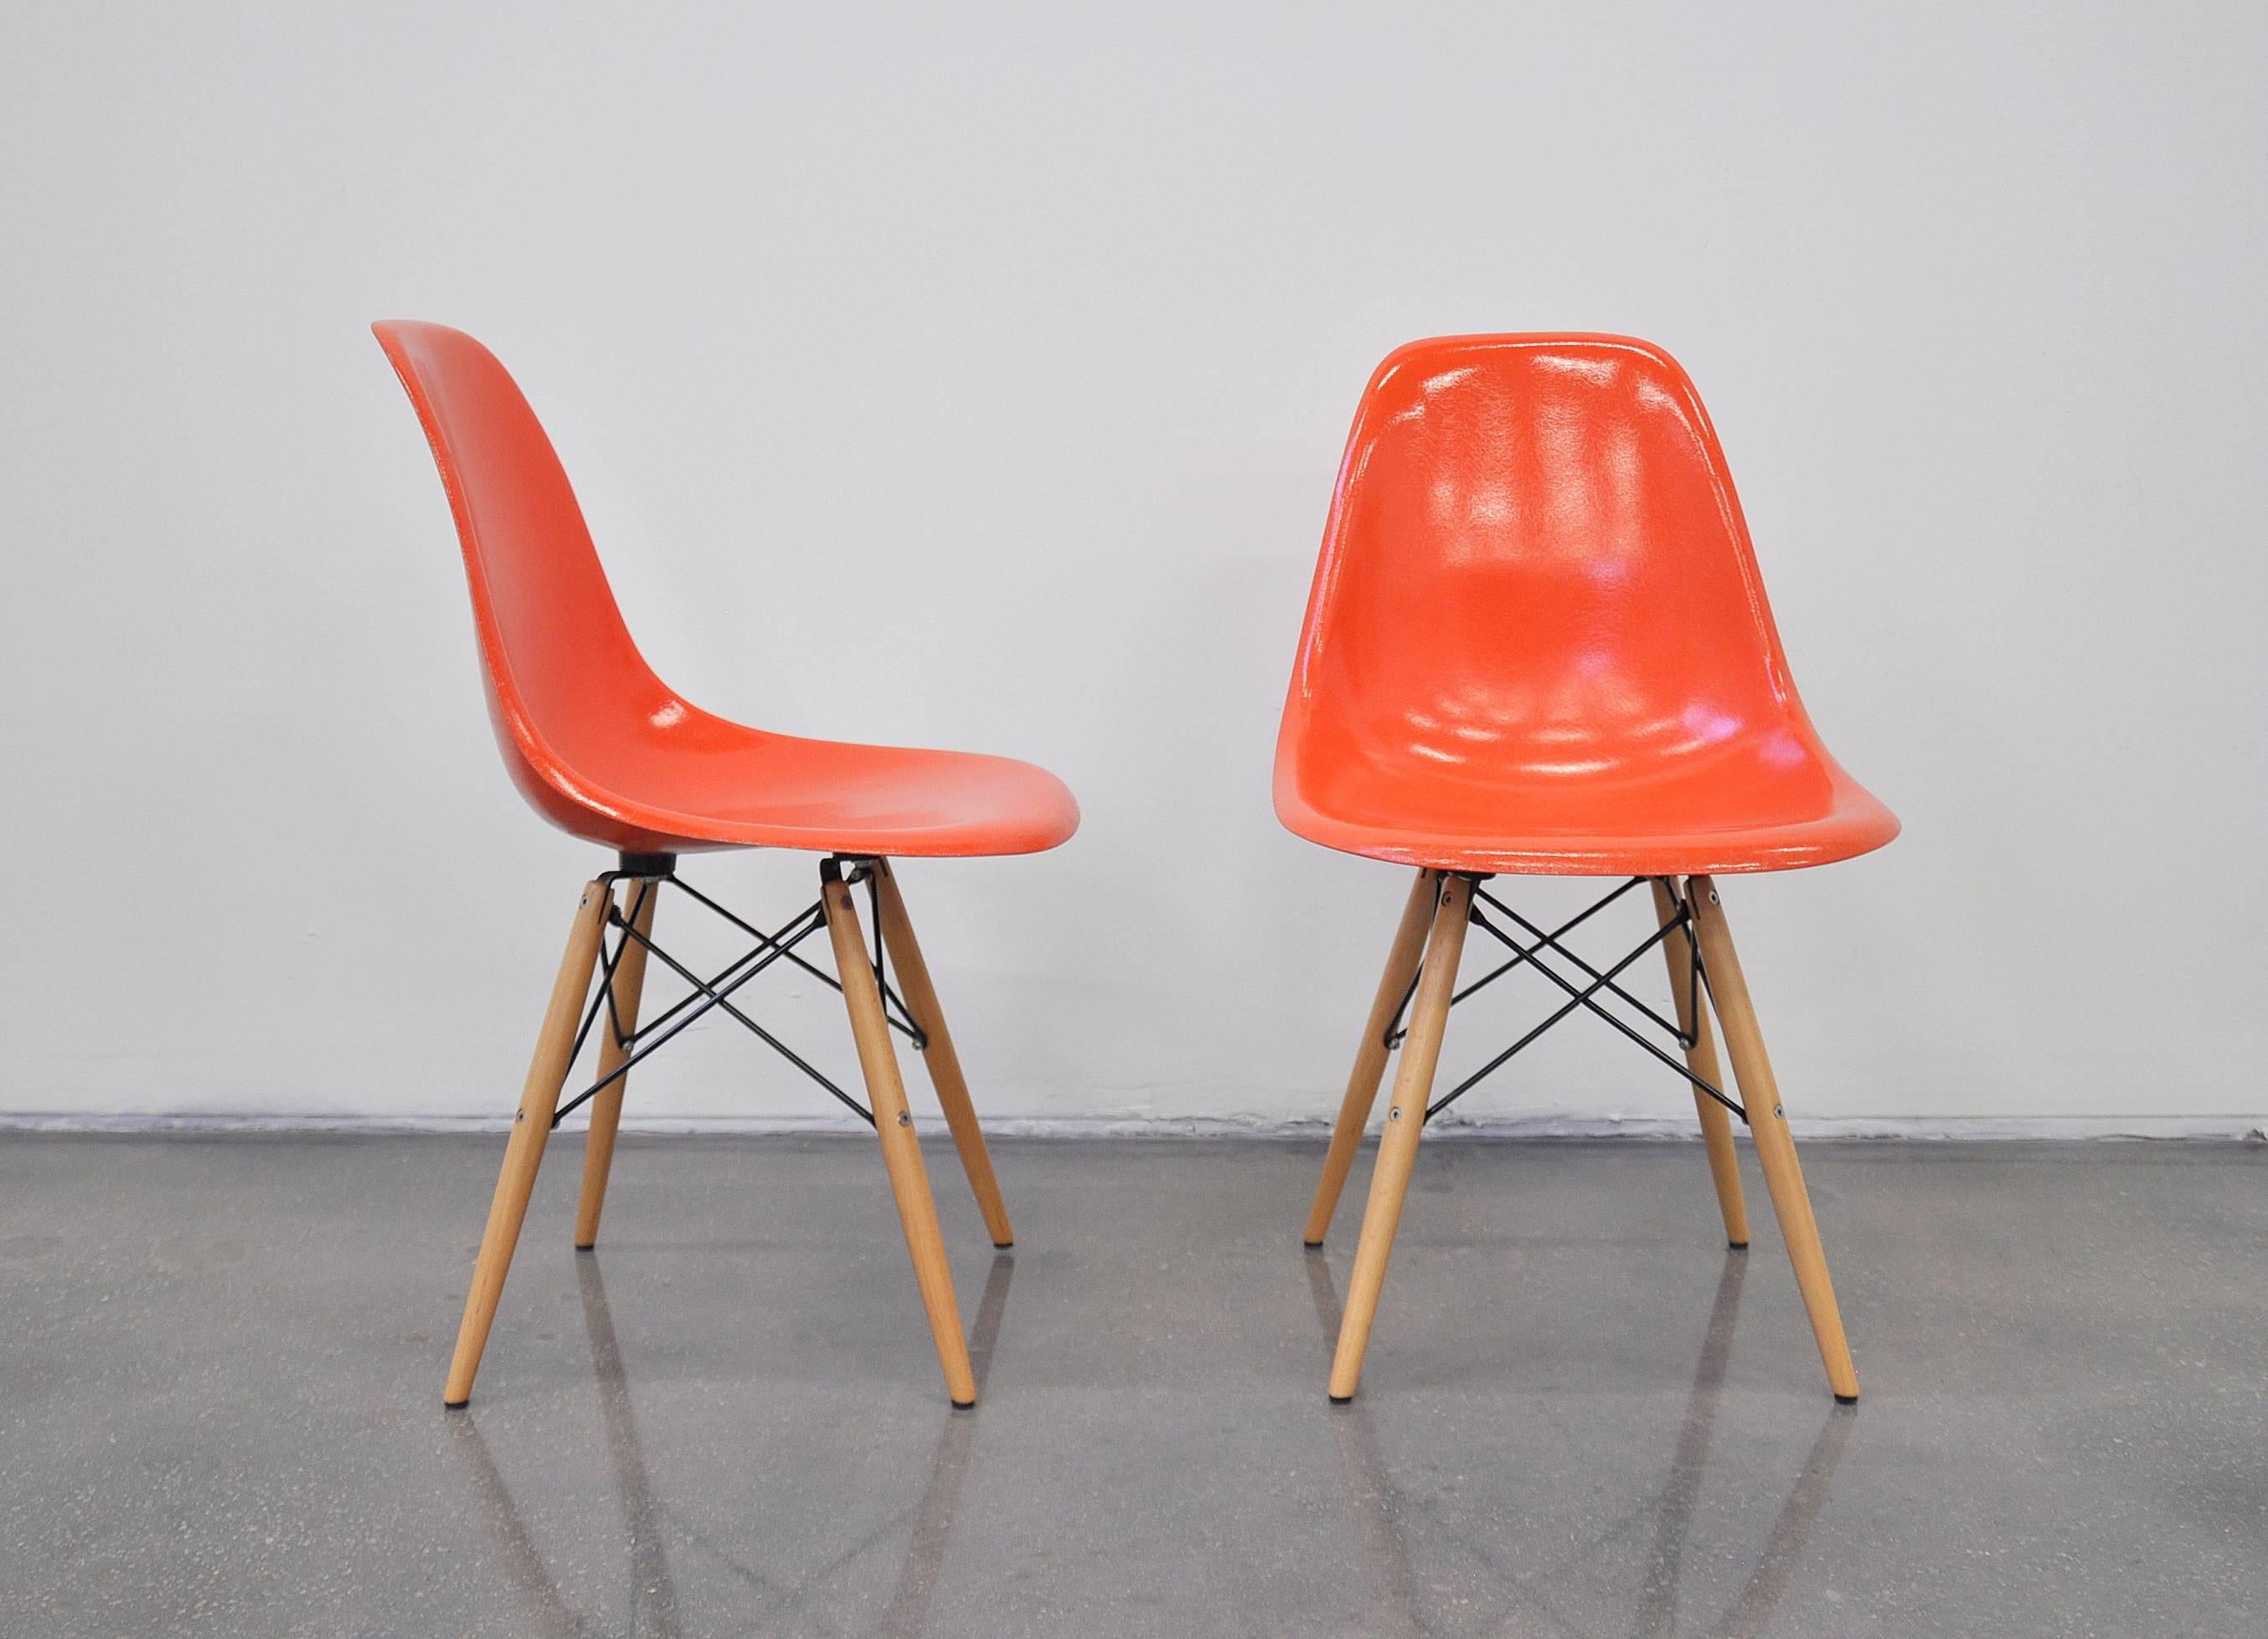 A vintage Mid-Century Modern DFSW shell chair designed by Charles and Ray Eames for Herman Miller, dating from the late 1950s. The dining or side chair features an orange fiberglass shell and maple wood dowel legs. Works well as office or desk chair